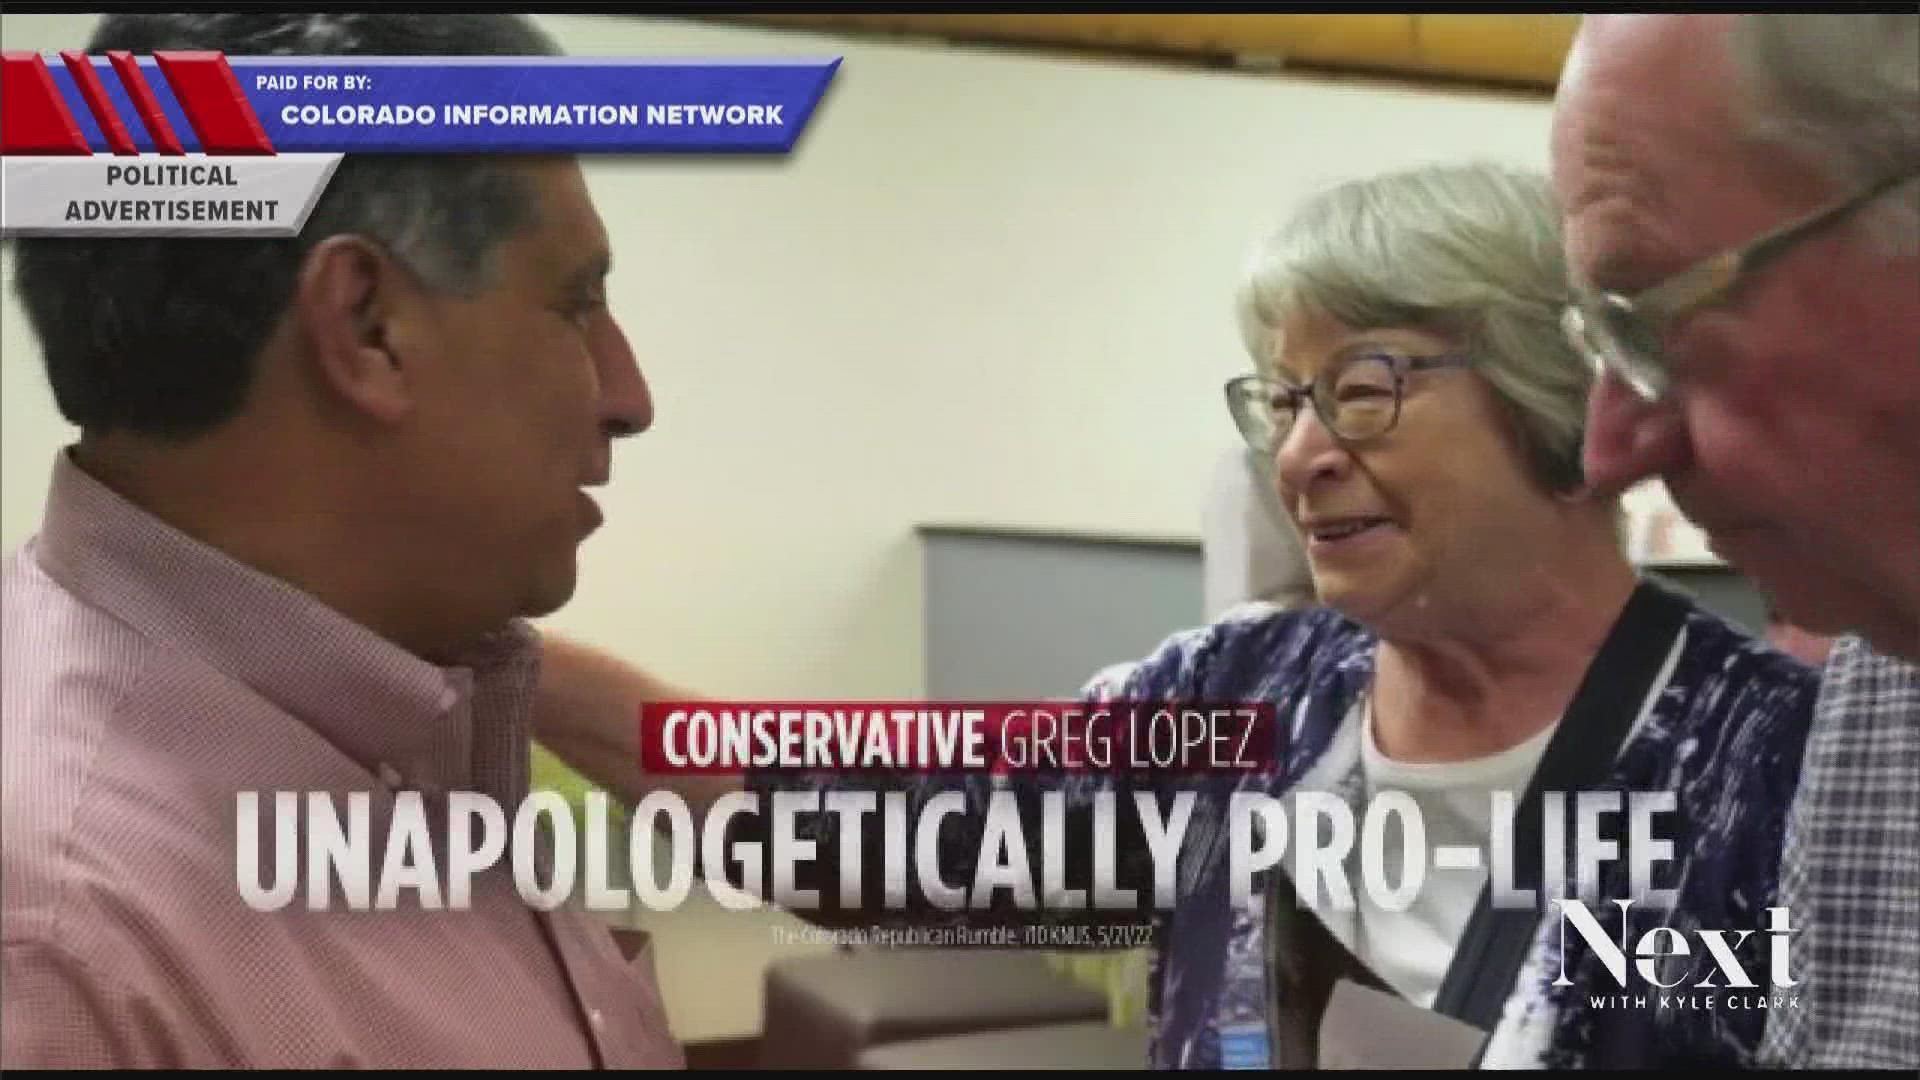 We know Democrats are meddling to try to pick the candidate they want. An ad about GOP gubernatorial candidate Greg Lopez calls him too conservative for Colorado.